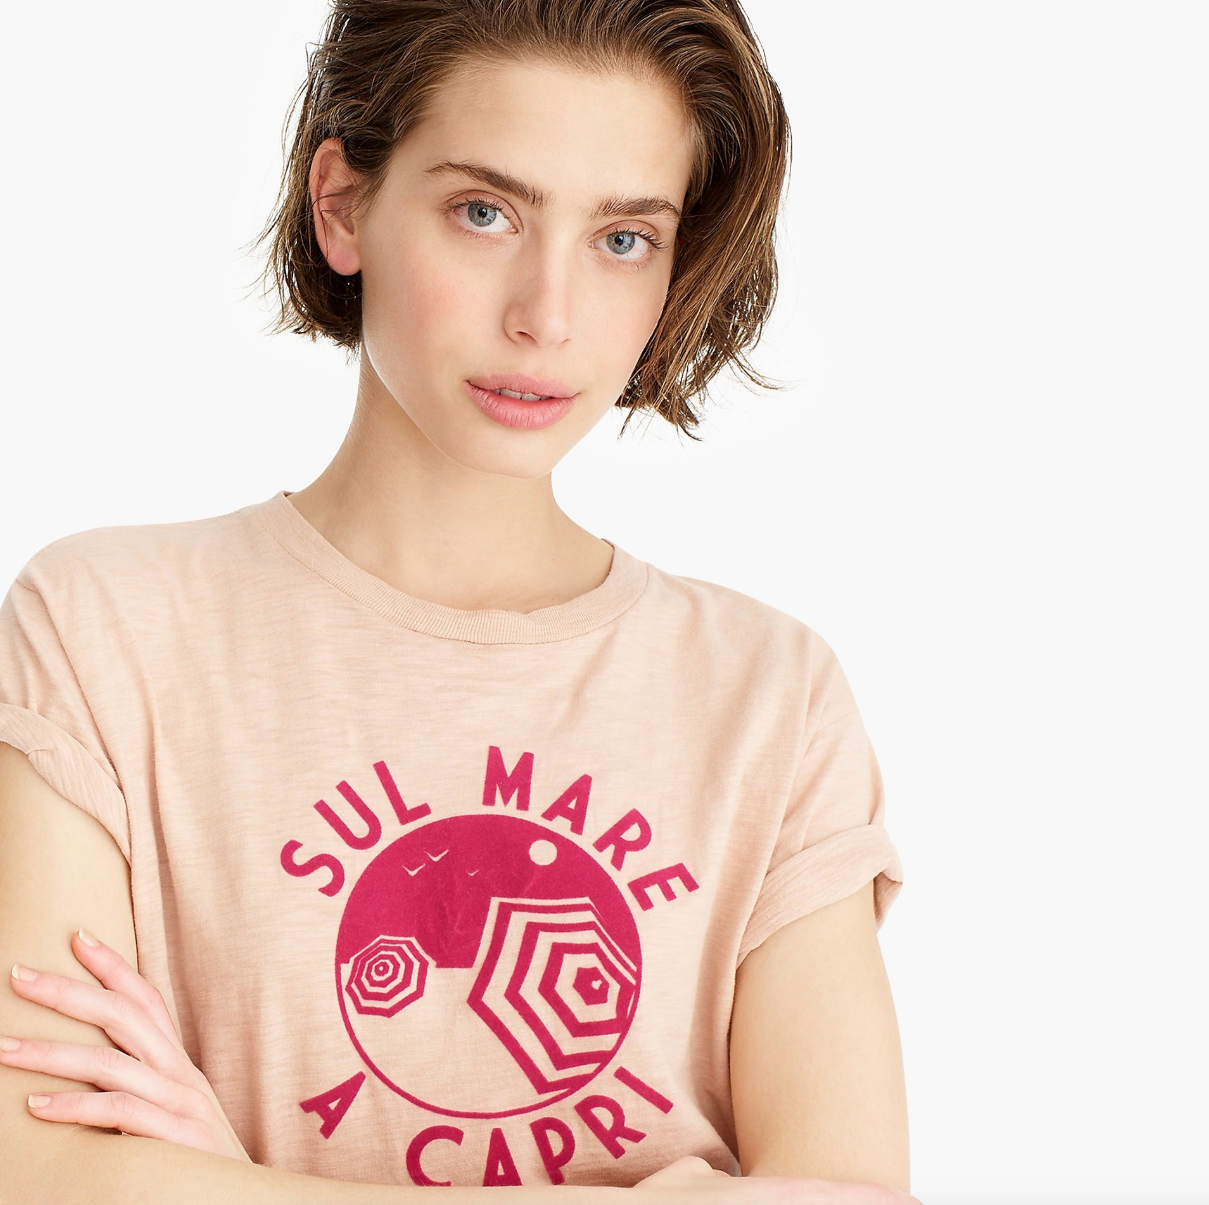 Camilla Atkins, CATKINS DESIGN for J. Crew Spring 2019, Italy screen printed tee shirt- women's apparel-3.png